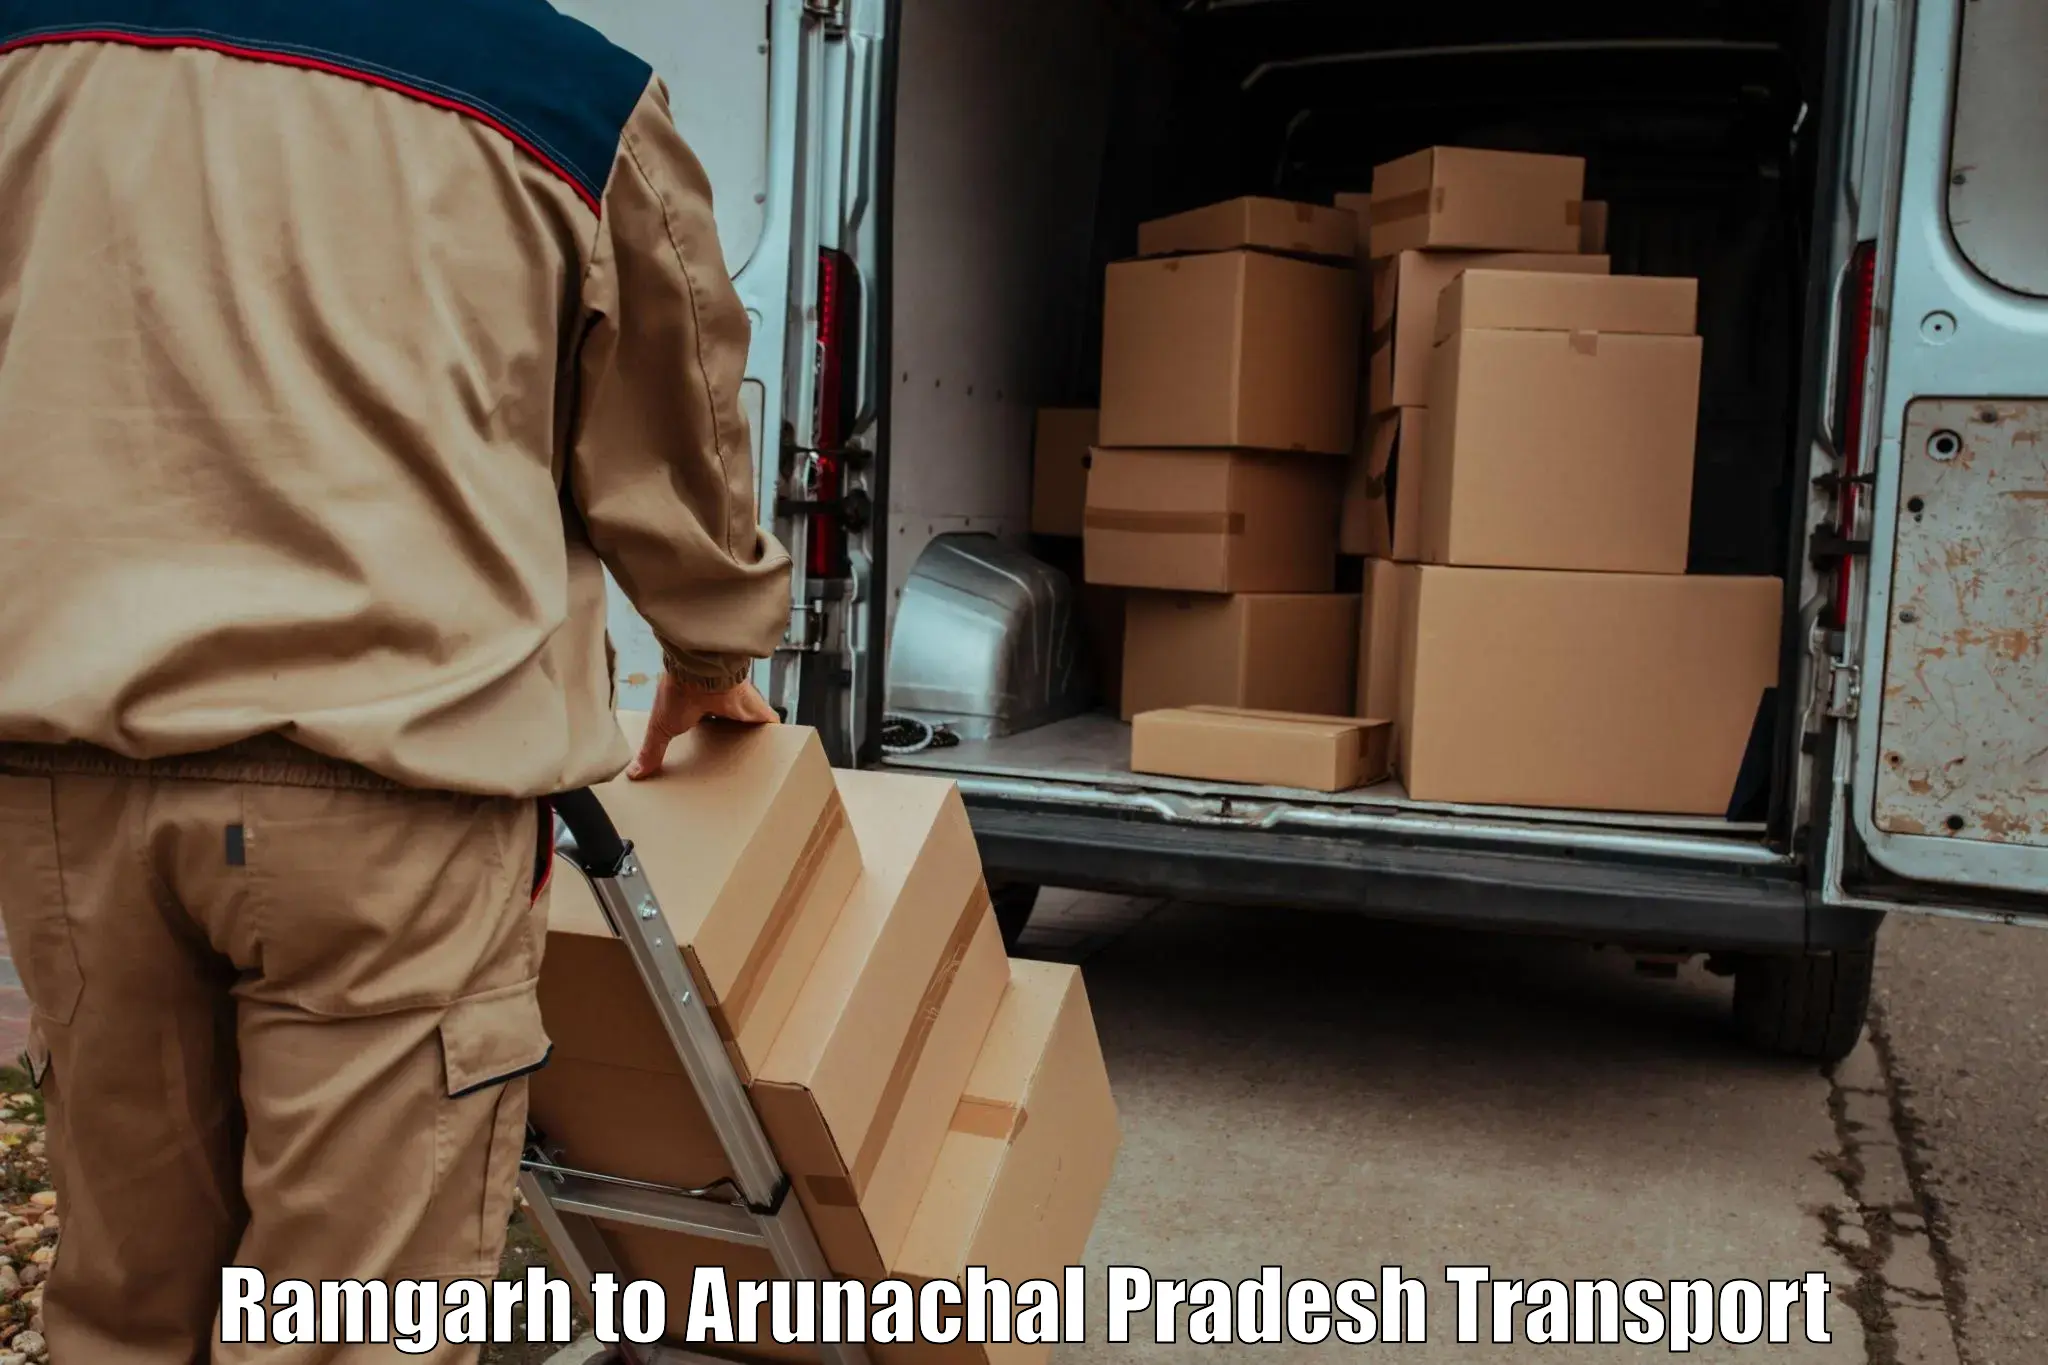 Parcel transport services in Ramgarh to Pasighat